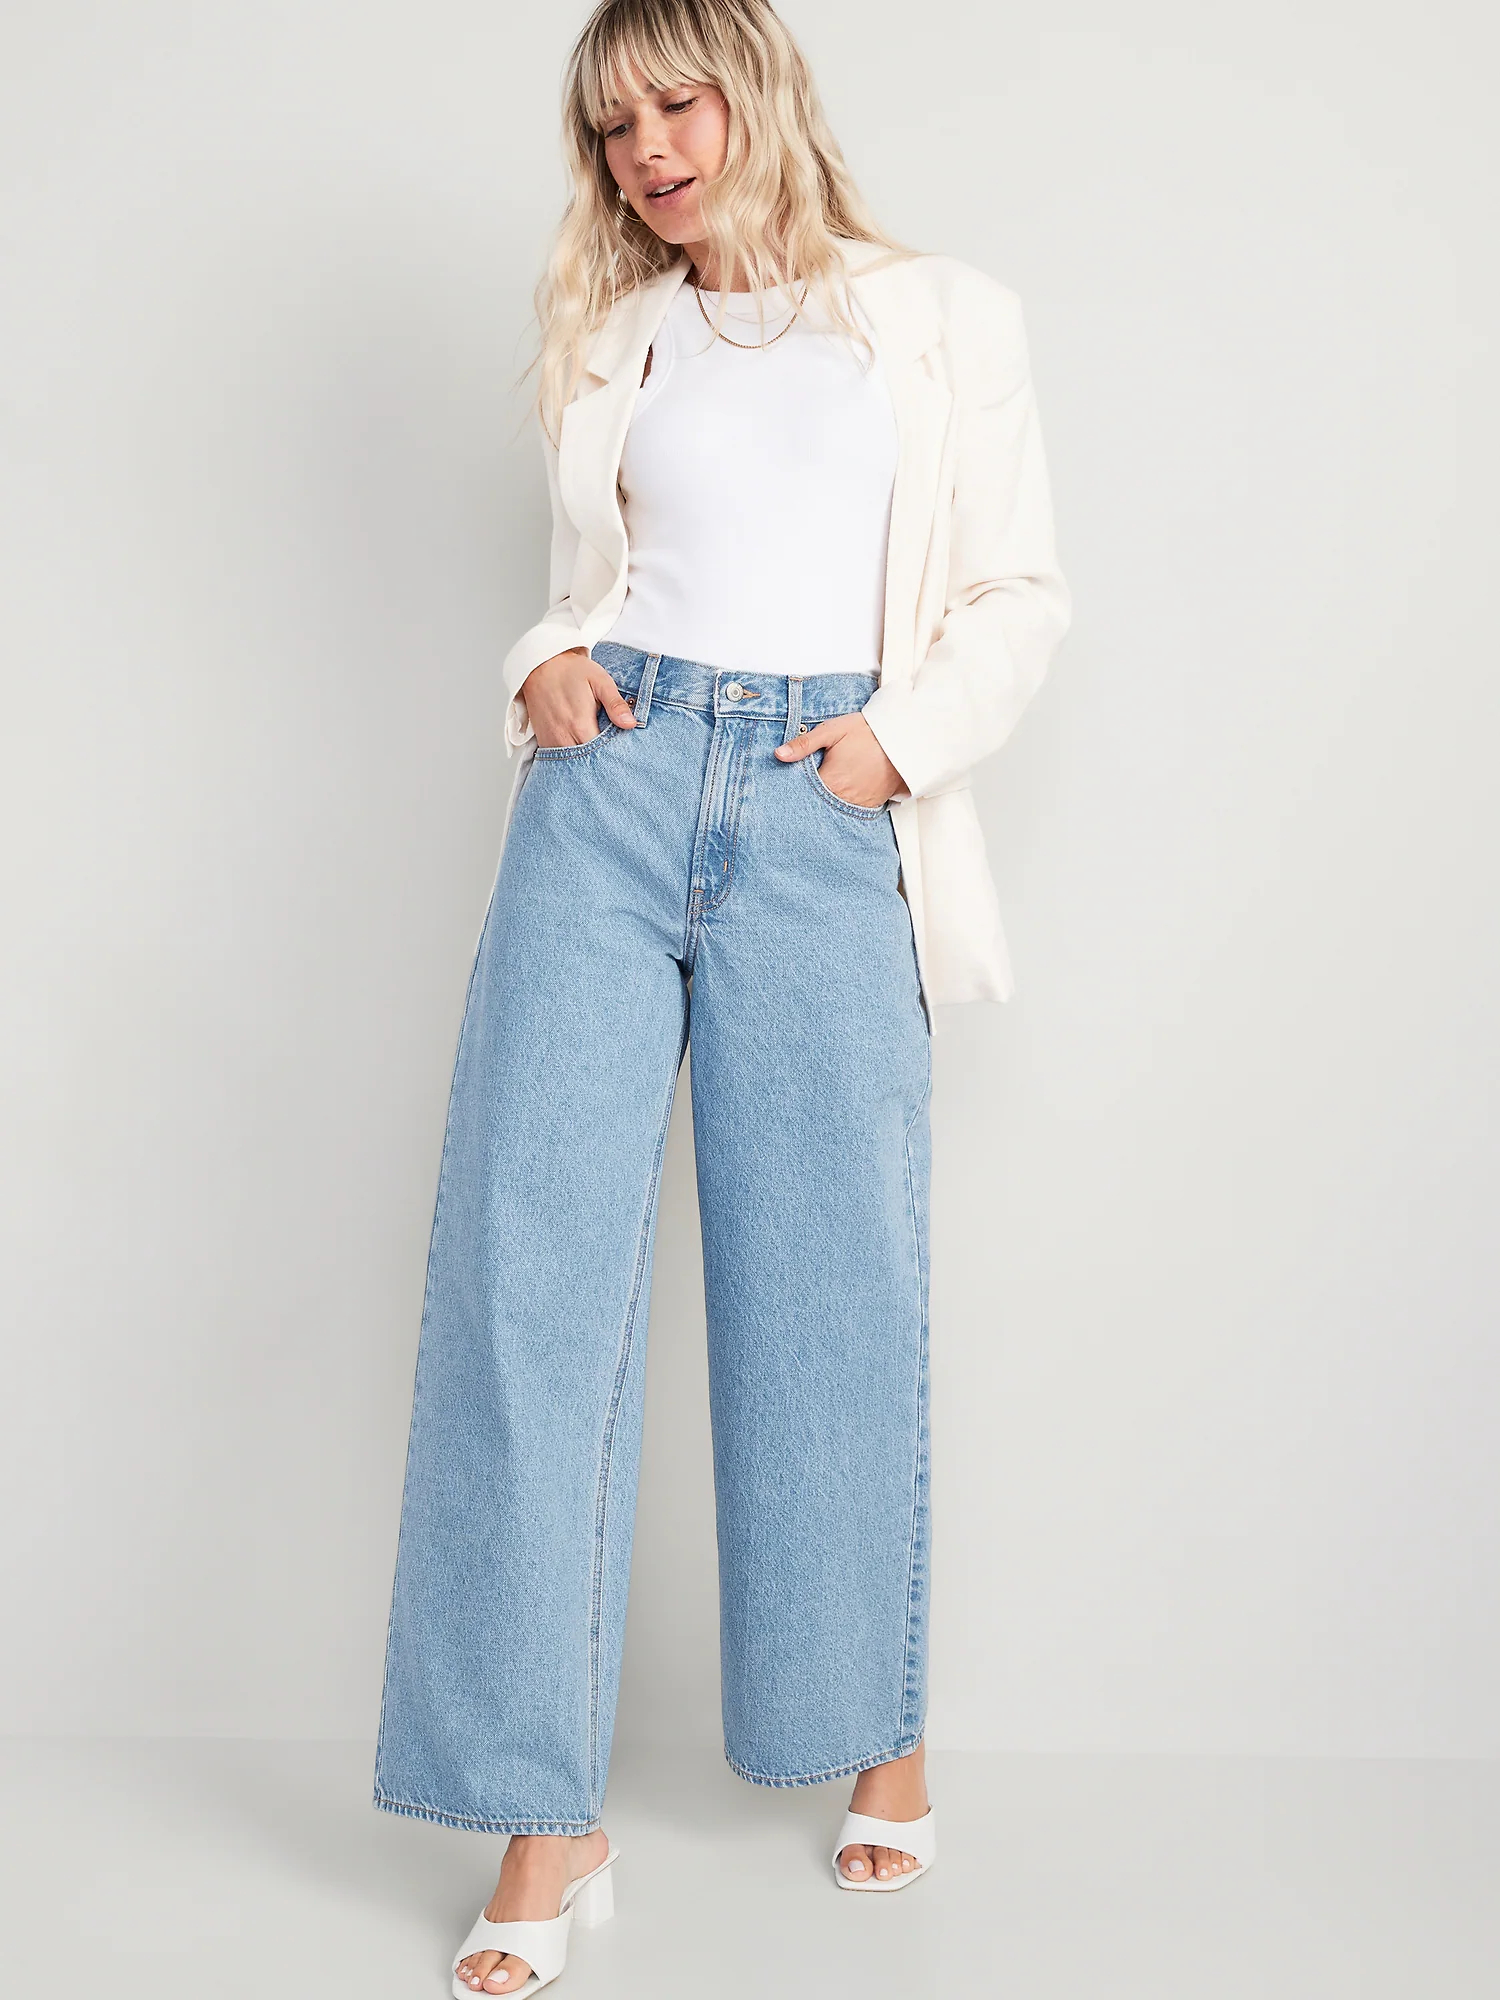 Wide leg baggy jeans, as the fashion pendulum swings away from the skin-tight silhouettes that have dominated the past decade